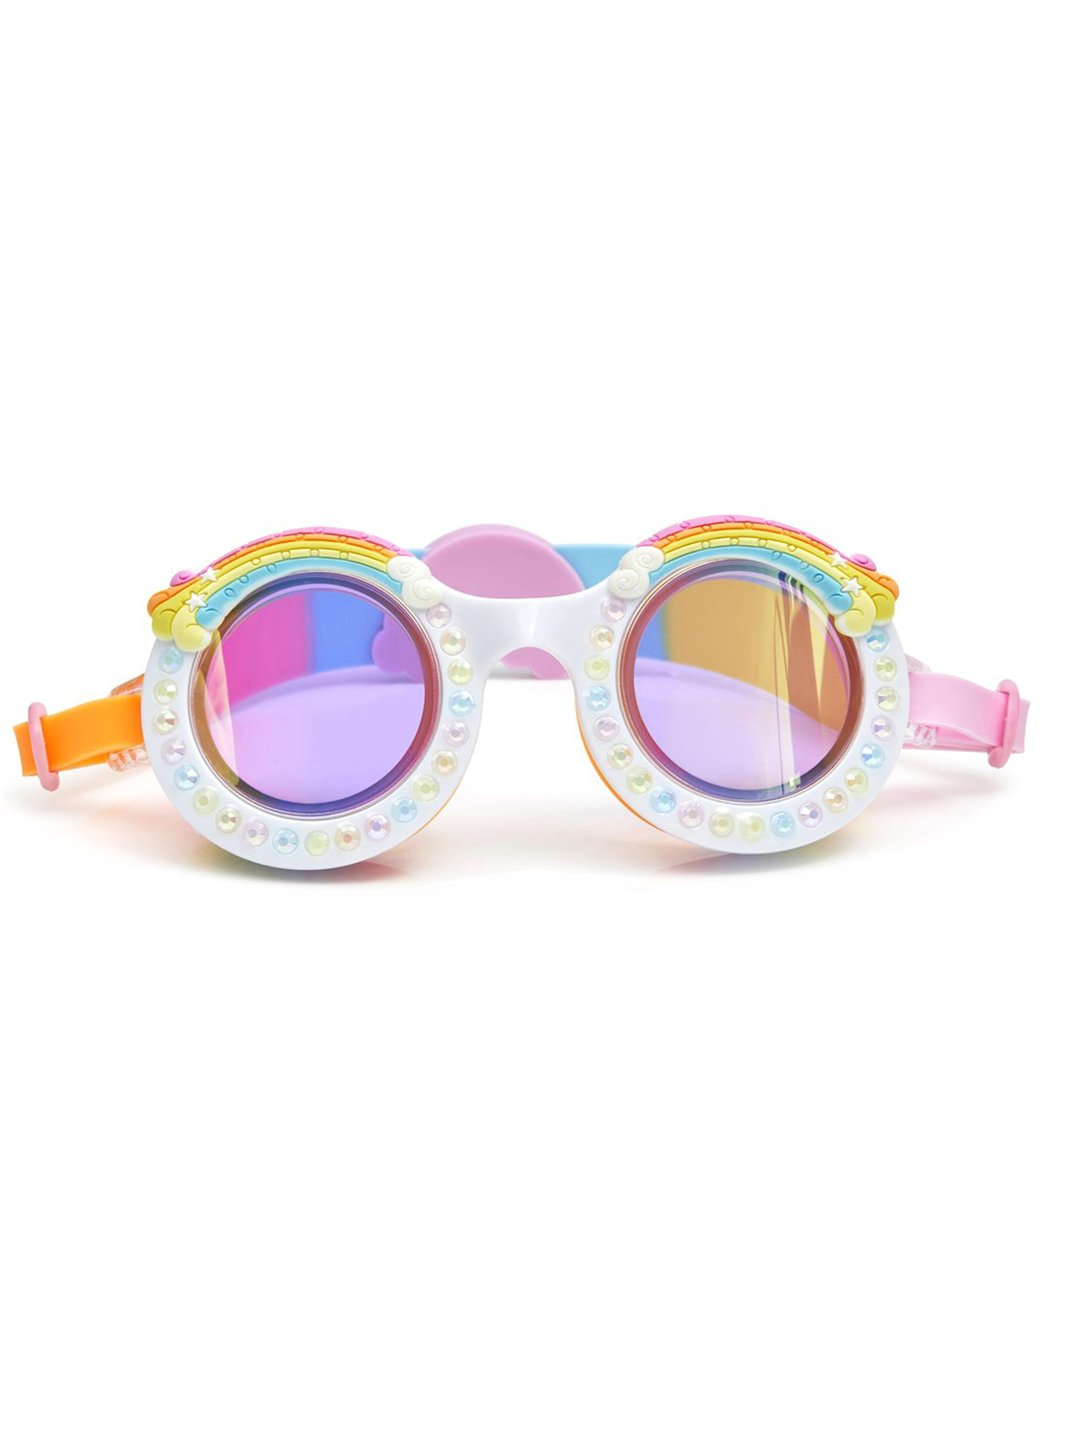 Bling swim goggles for kids: Rainbow goggles at Stella Cove are like My Little Pony meets Eltton John!